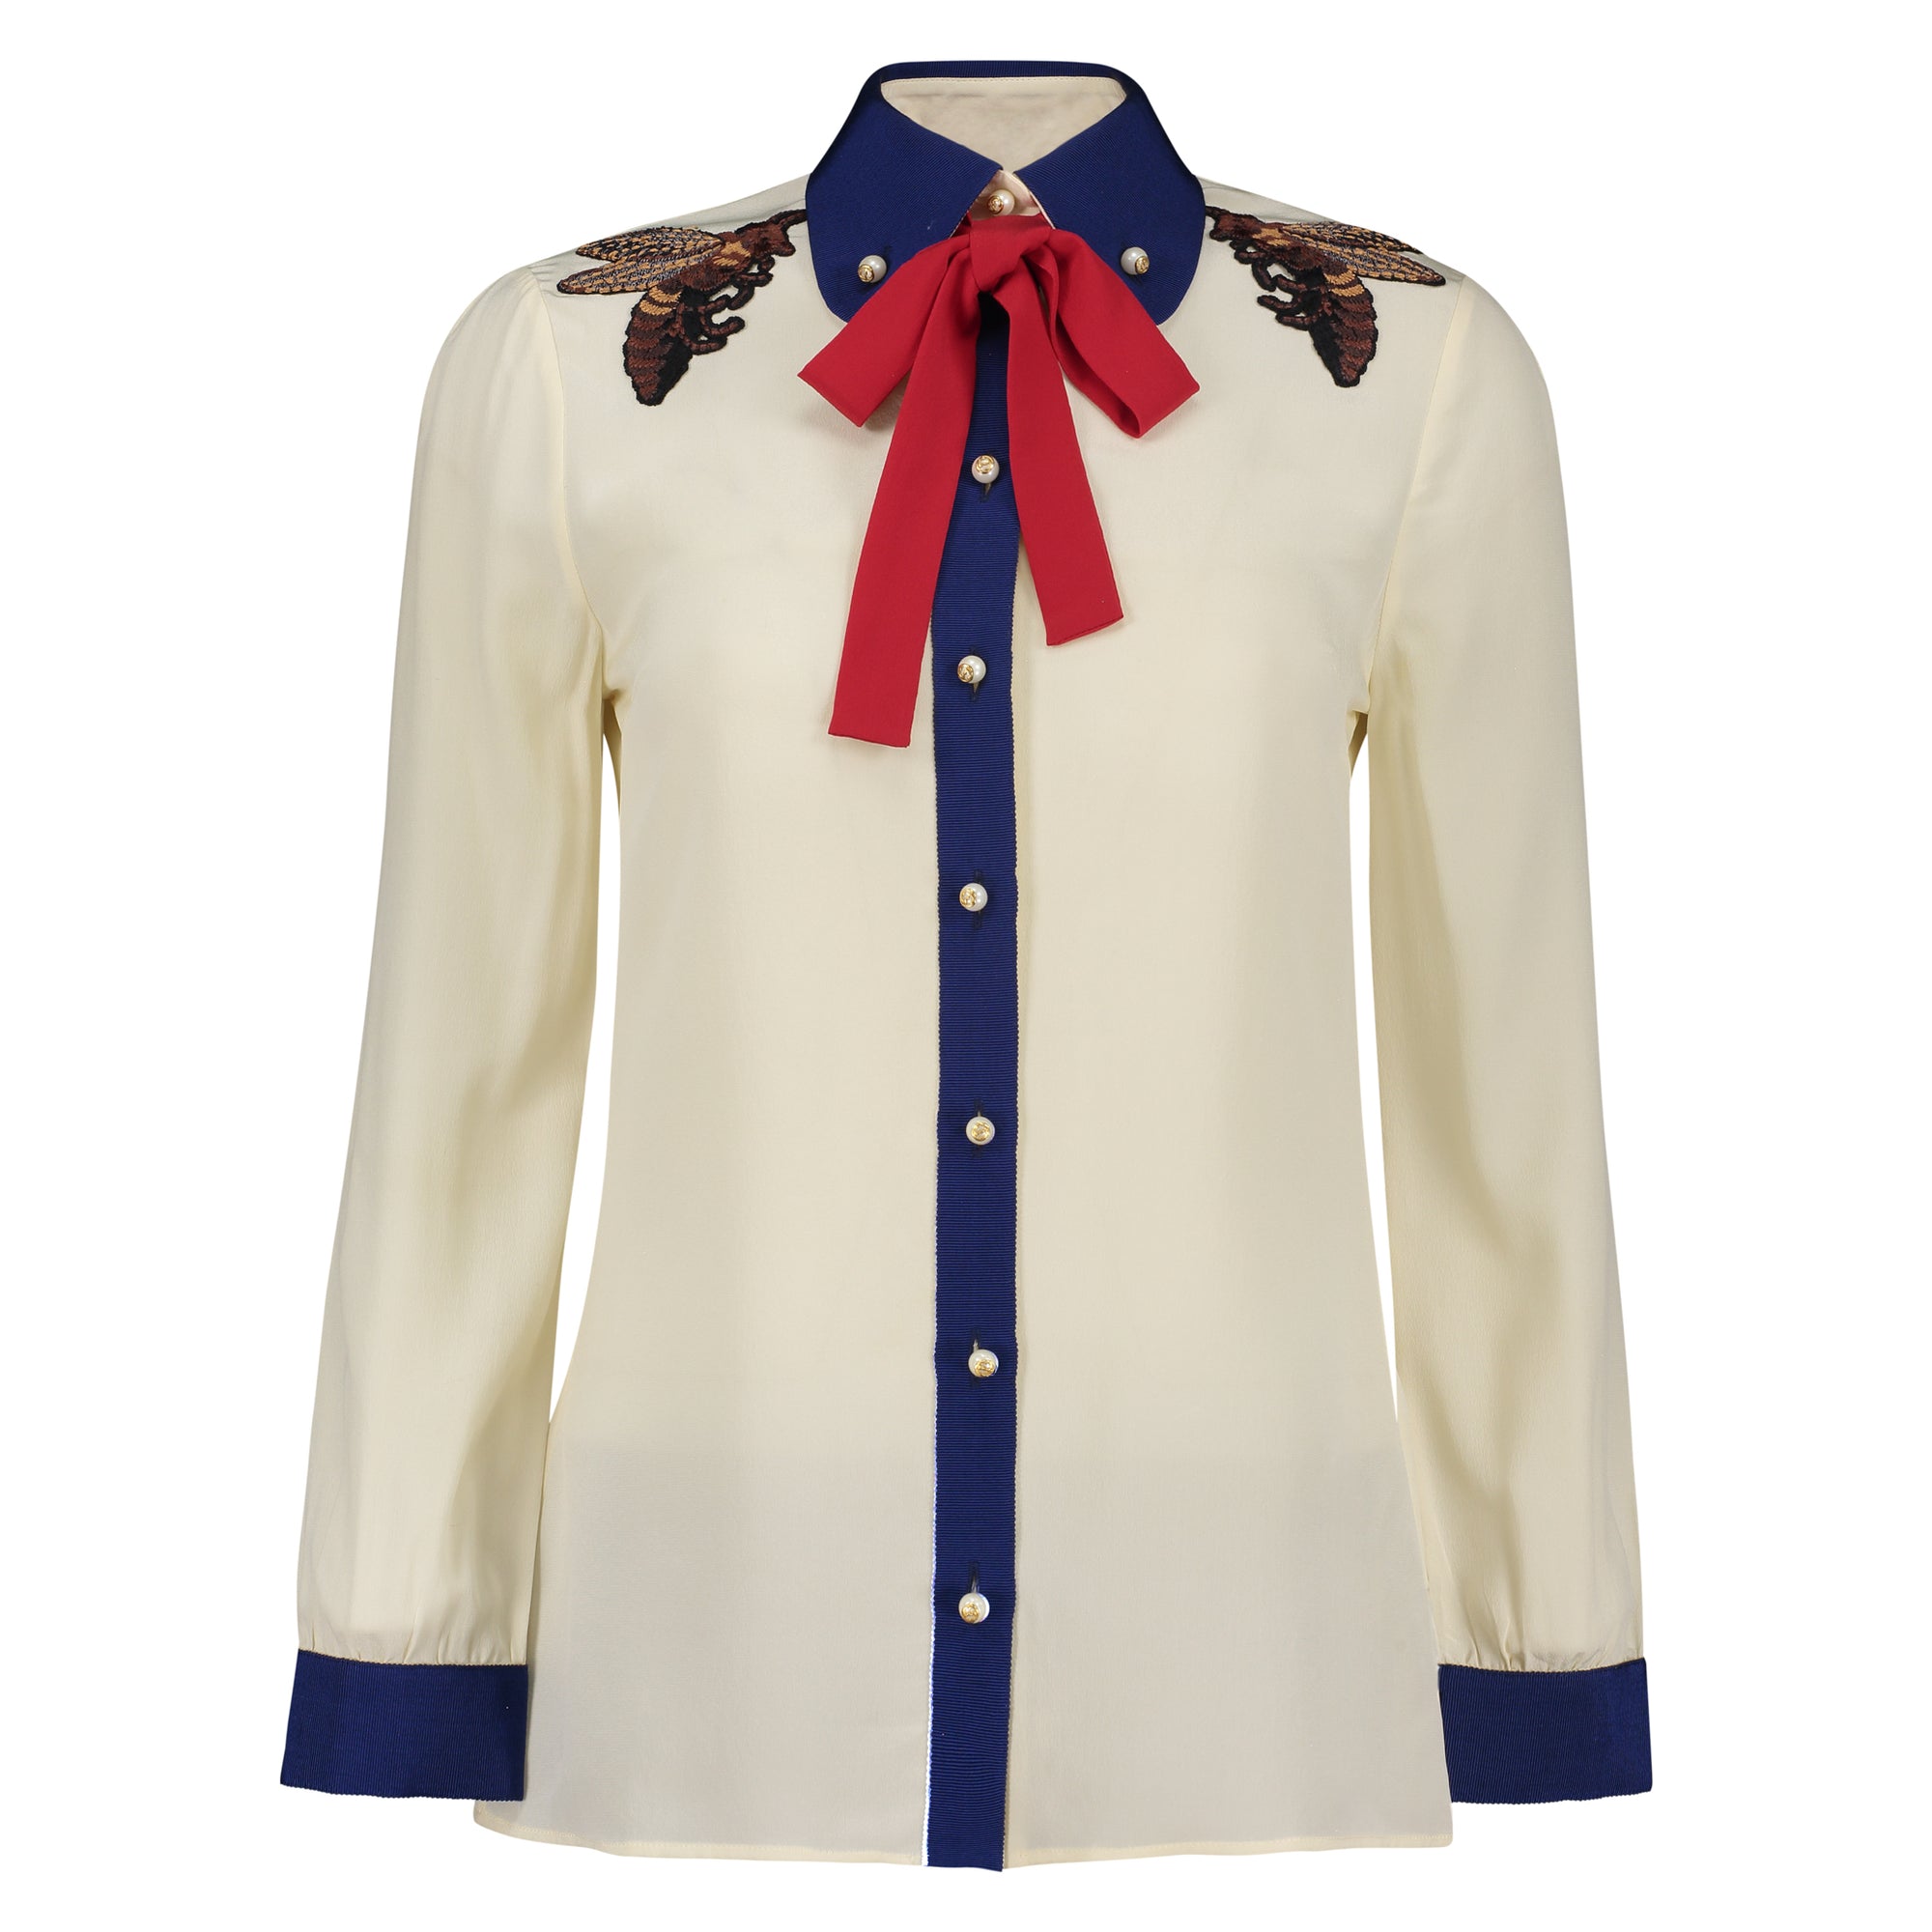 Gucci Women's White Embroidered Bee Shirt